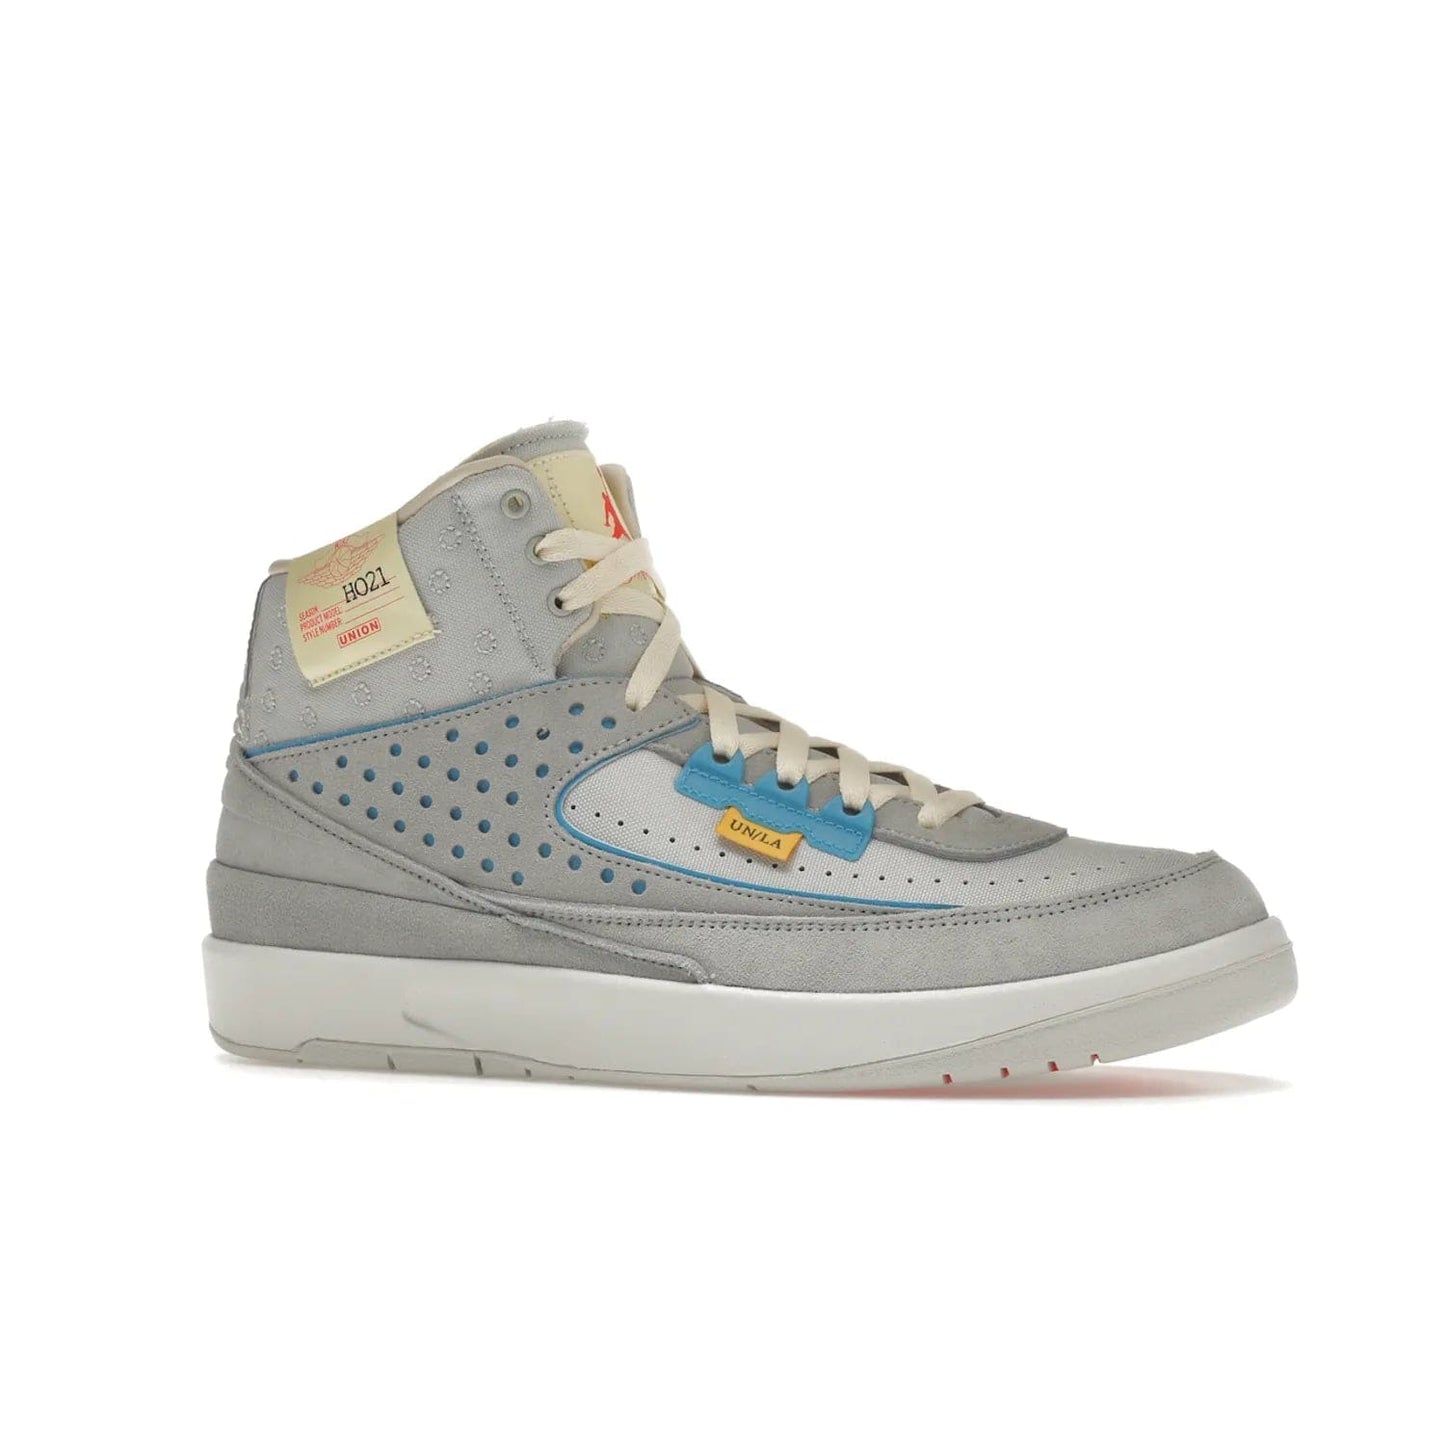 Jordan 2 Retro SP Union Grey Fog - Image 3 - Only at www.BallersClubKickz.com - Introducing the Air Jordan 2 Retro SP Union Grey Fog. This intricate sneaker design features a grey canvas upper with light blue eyelets, eyestay patches, and piping, plus custom external tags. Dropping in April 2022, this exclusive release offers a worn-in look and feel.